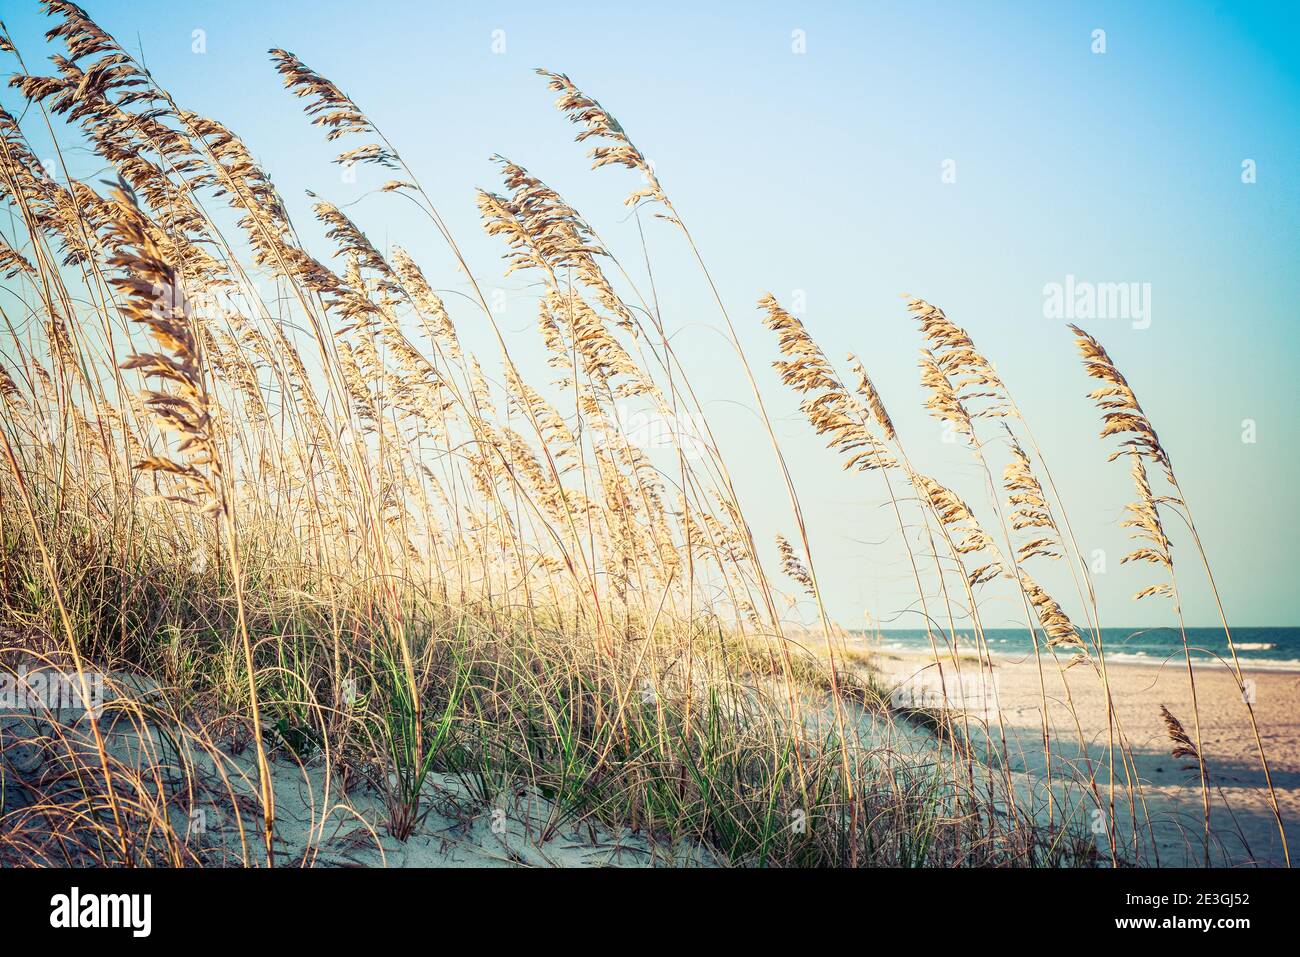 A pale, serene view of sea grass covering the dunes in foreground with a distant Atlantic Ocean on Fernandina Beach, on Amelia Island, FL Stock Photo